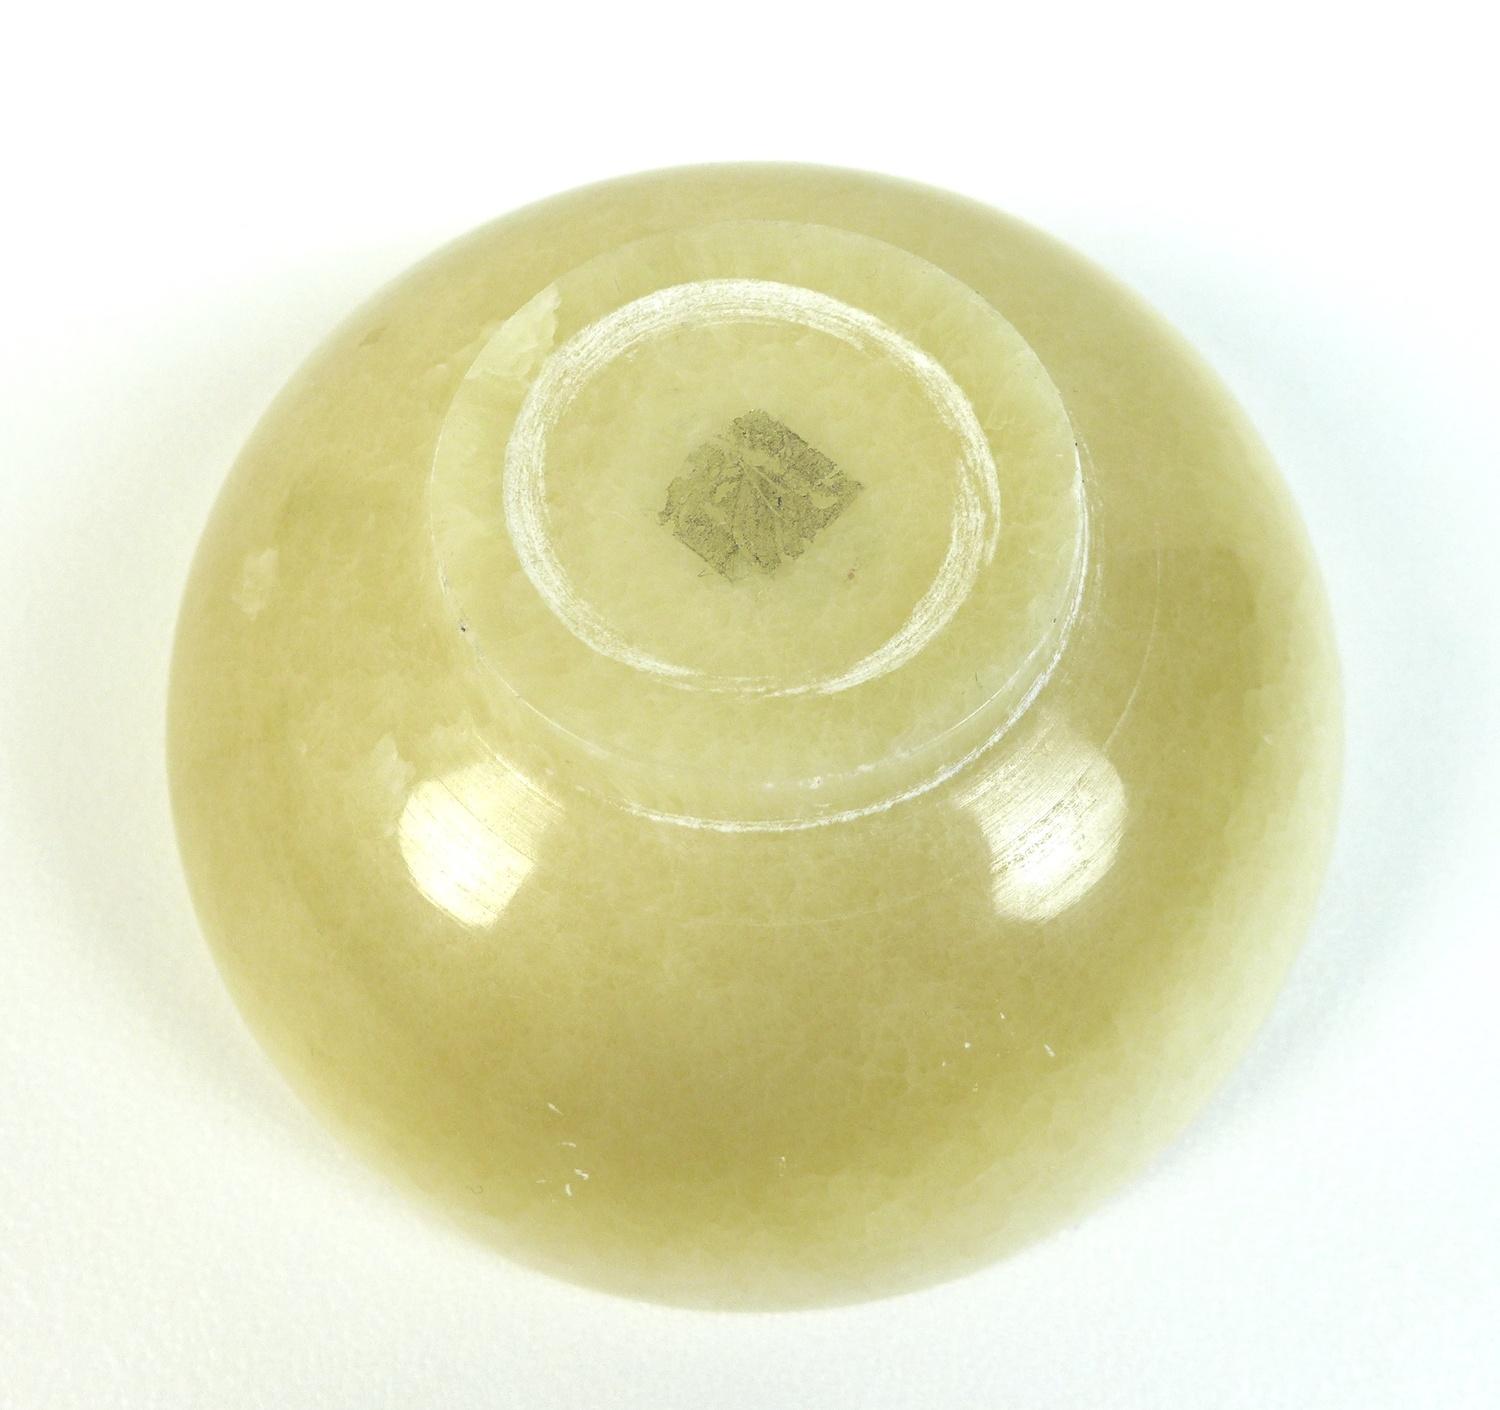 A Chinese mutton fat jade bowl, 11 by 4.5cm, together with a pale green and white jade bangle, 6cm - Image 5 of 7